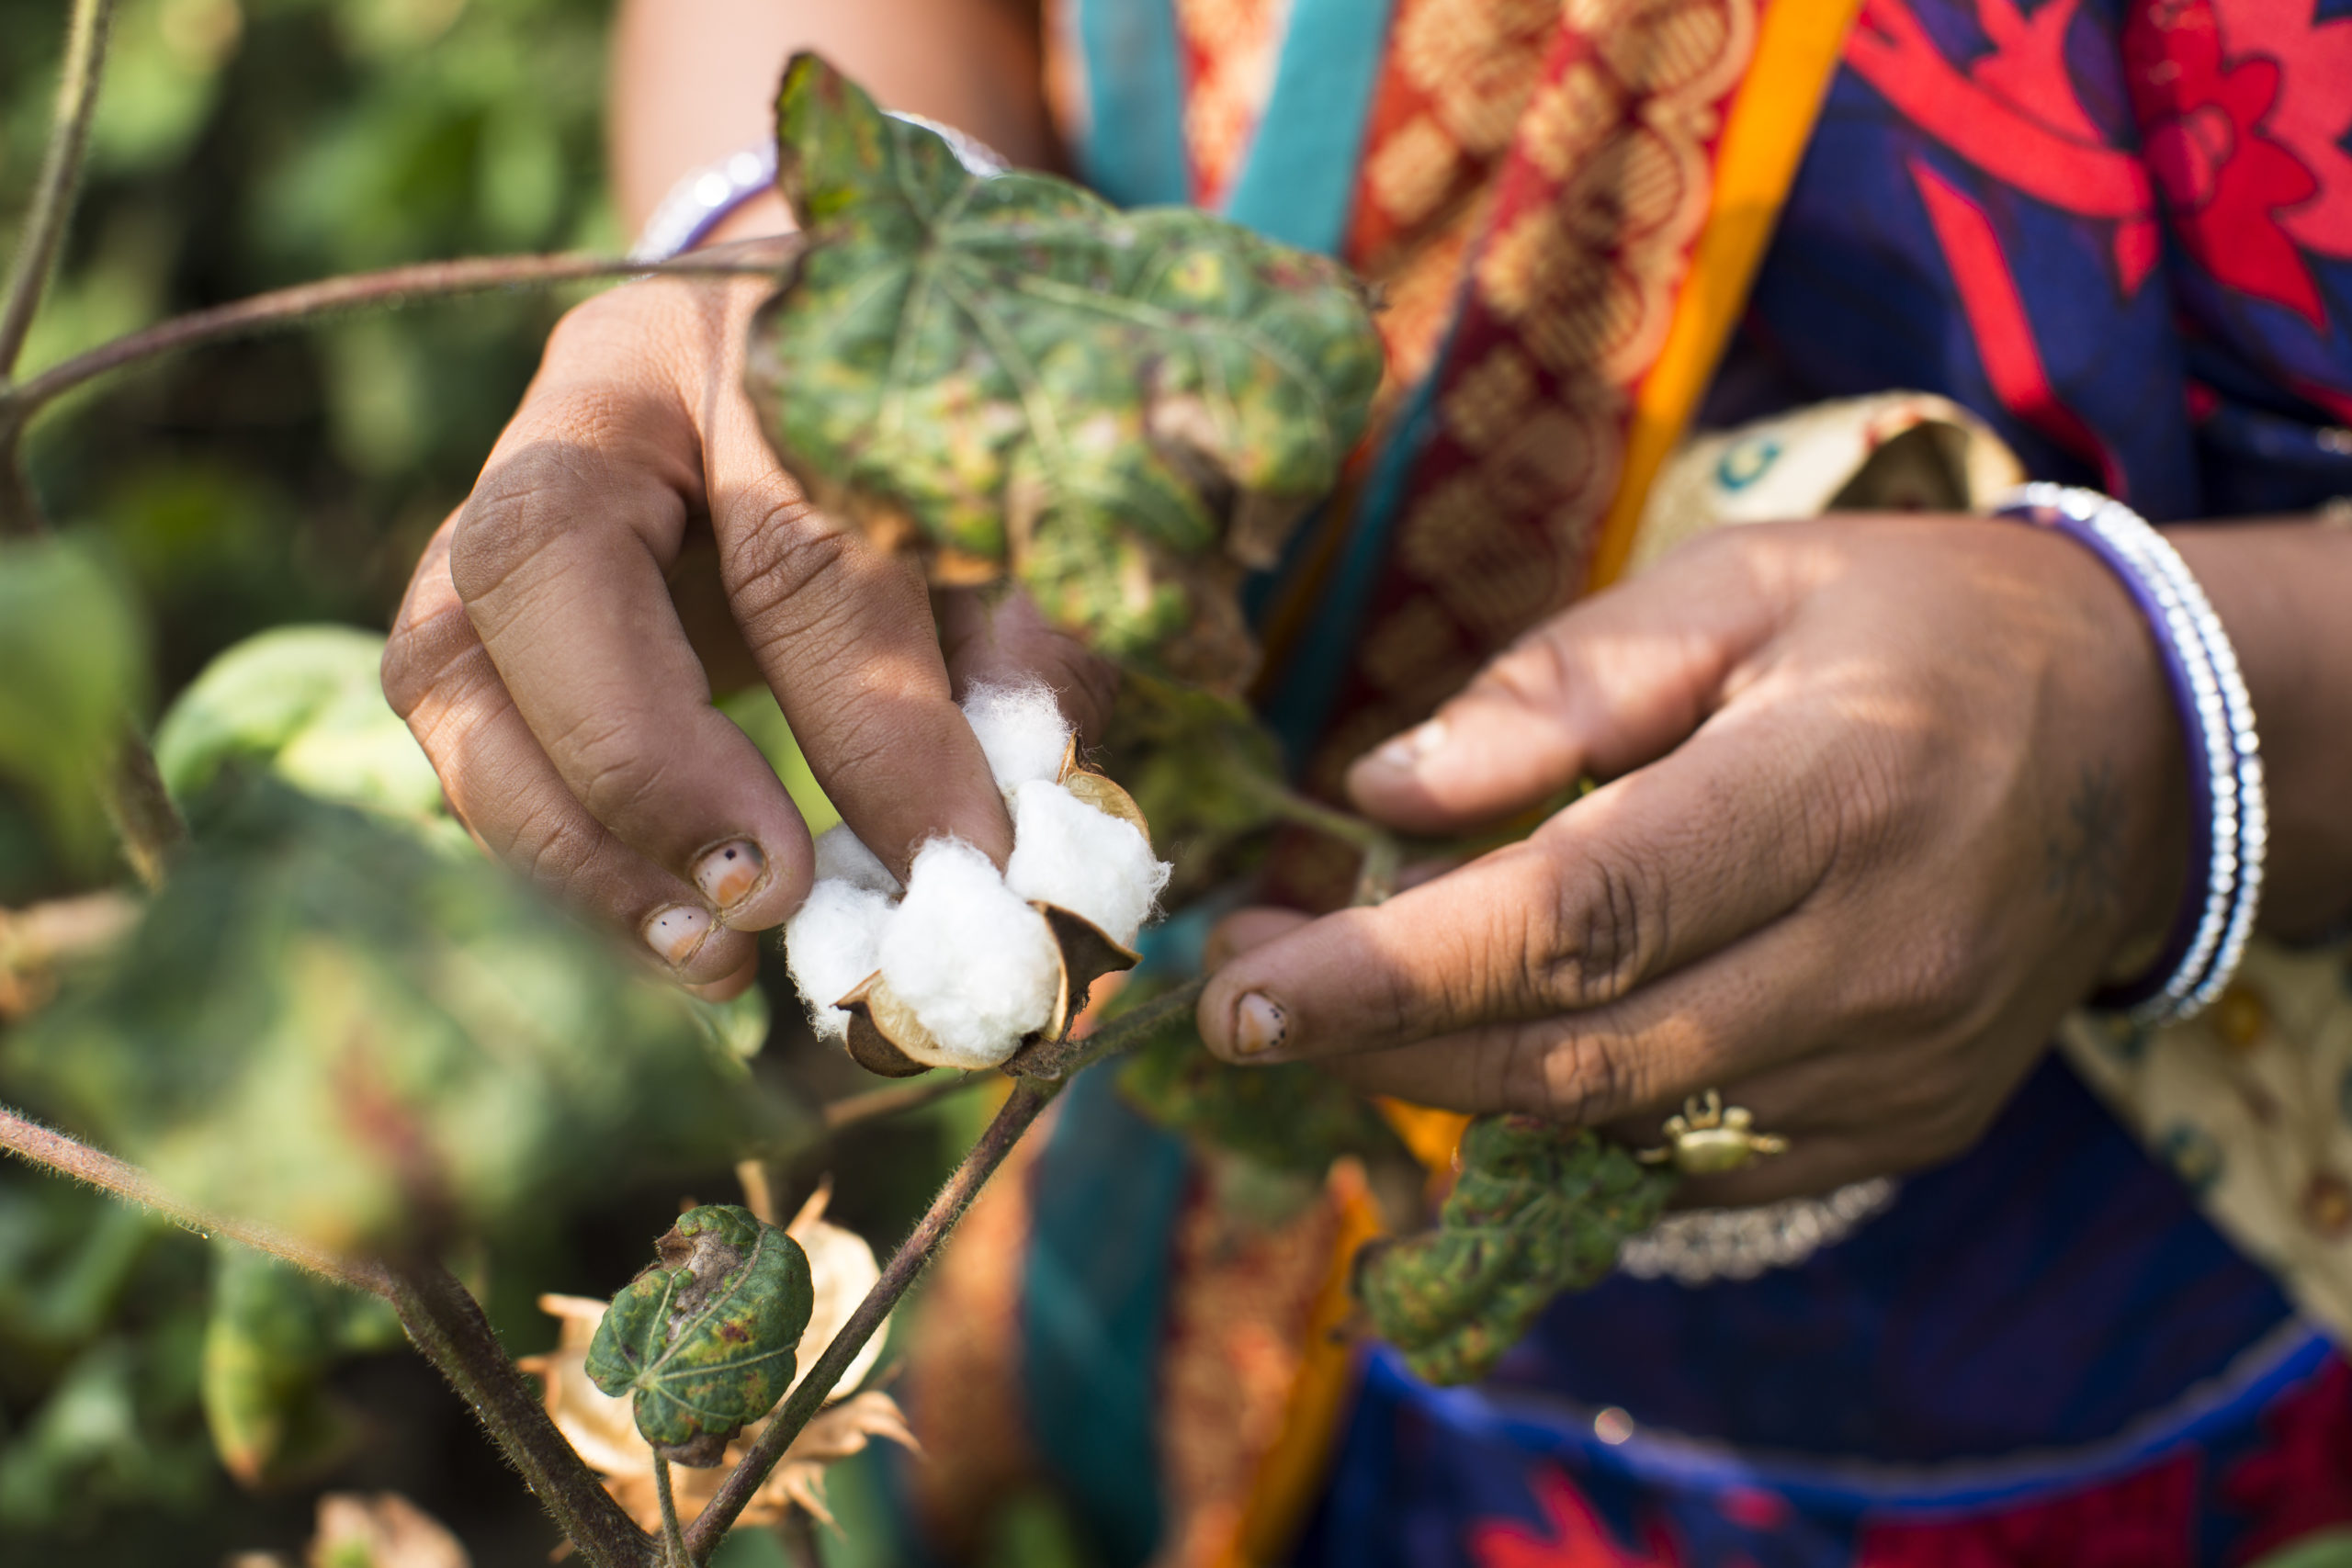 Fairtrade cotton farmer Sugna Jat, 30, picks cotton together with her husband, Nandaram Jat, 40, in their farm in Maheshwar, Khargone, Madhya Pradesh, India on 13 November 2014. Sugna and Nandaram do the farming together and hire labourers at a fair wage when they need to. Photo by Suzanne Lee for Fairtrade